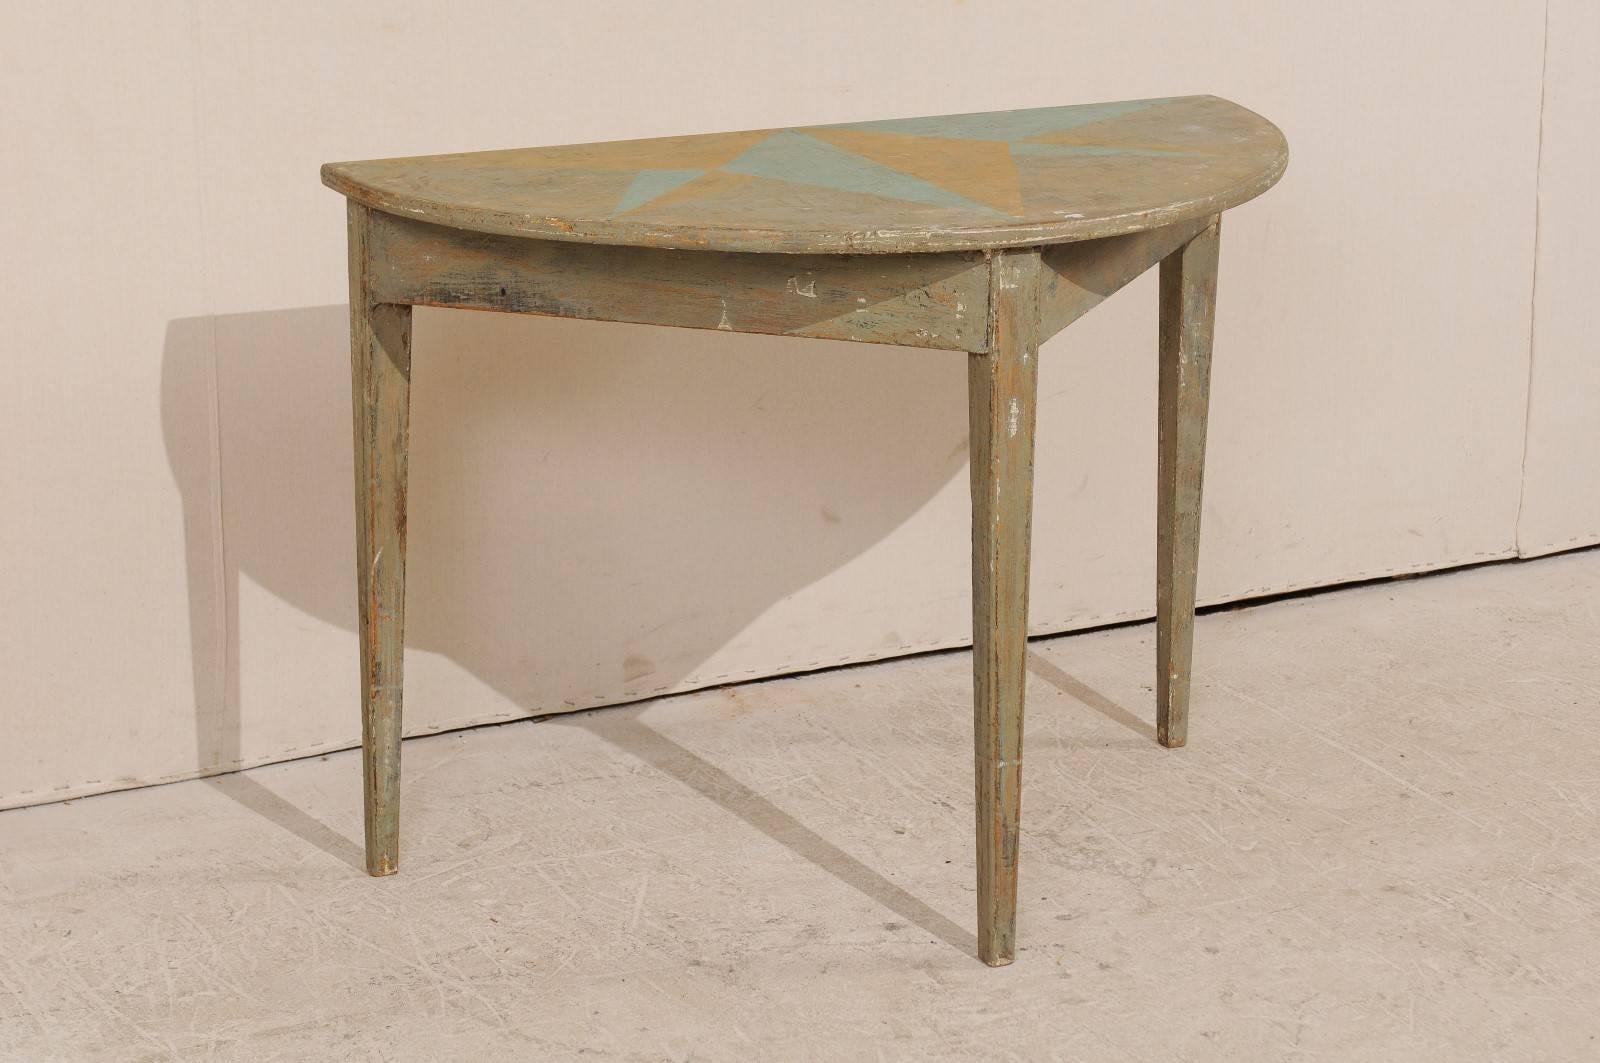 Hand-Painted Swedish 19th Century Single Painted Wood Demi-Lune Table with Custom Star Motif